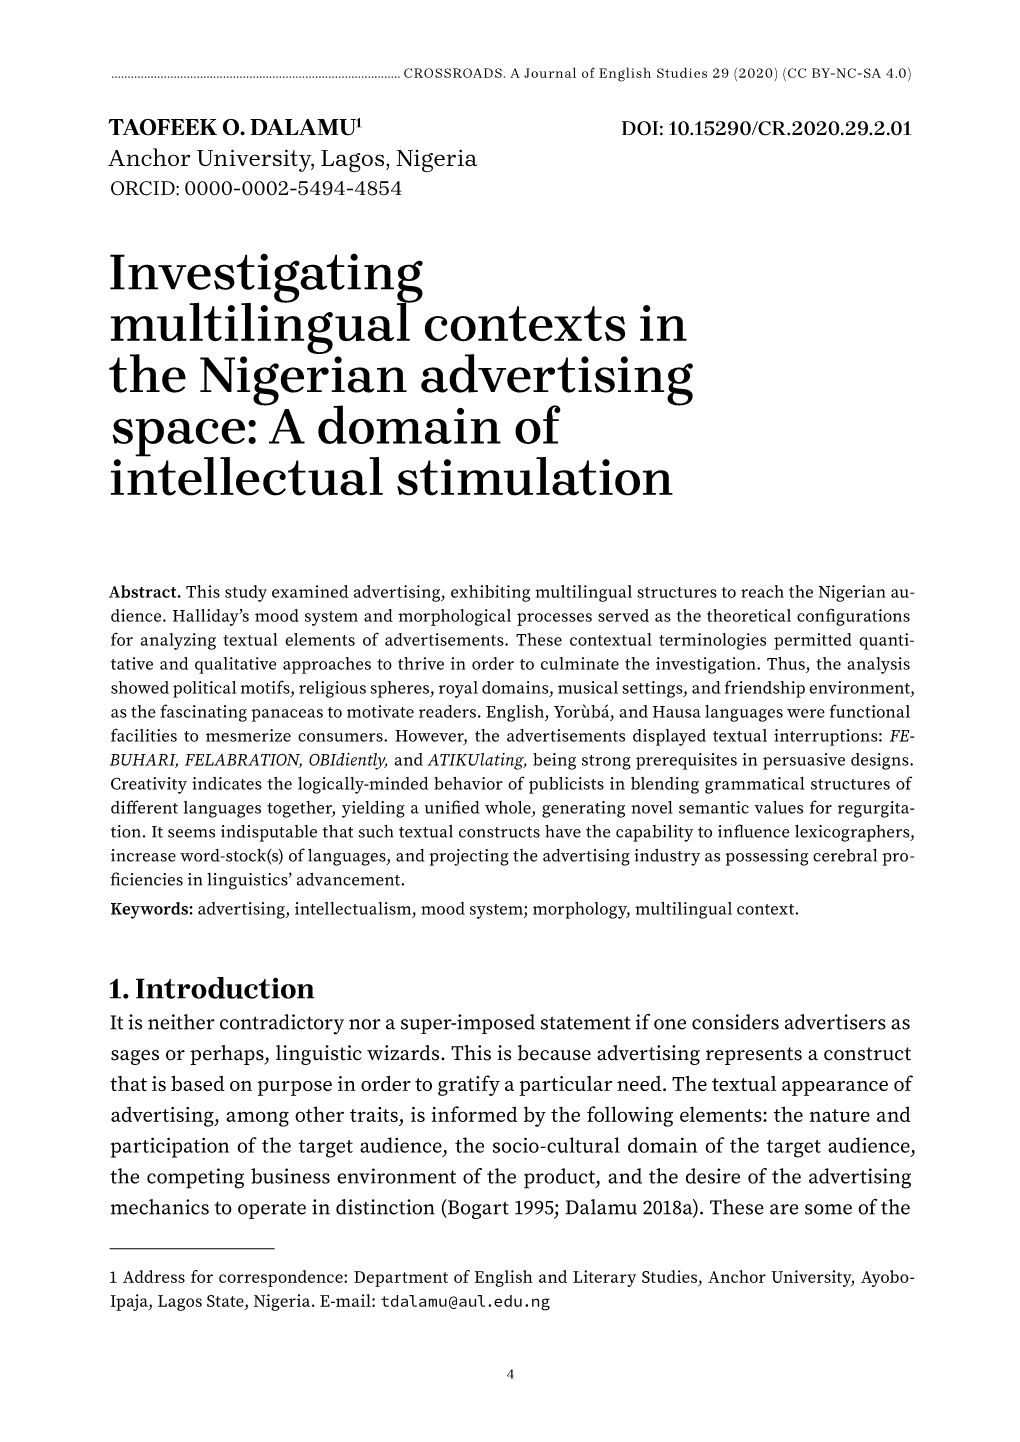 Multilingual Contexts in the Nigerian Advertising Space: a Domain of Intellectual Stimulation